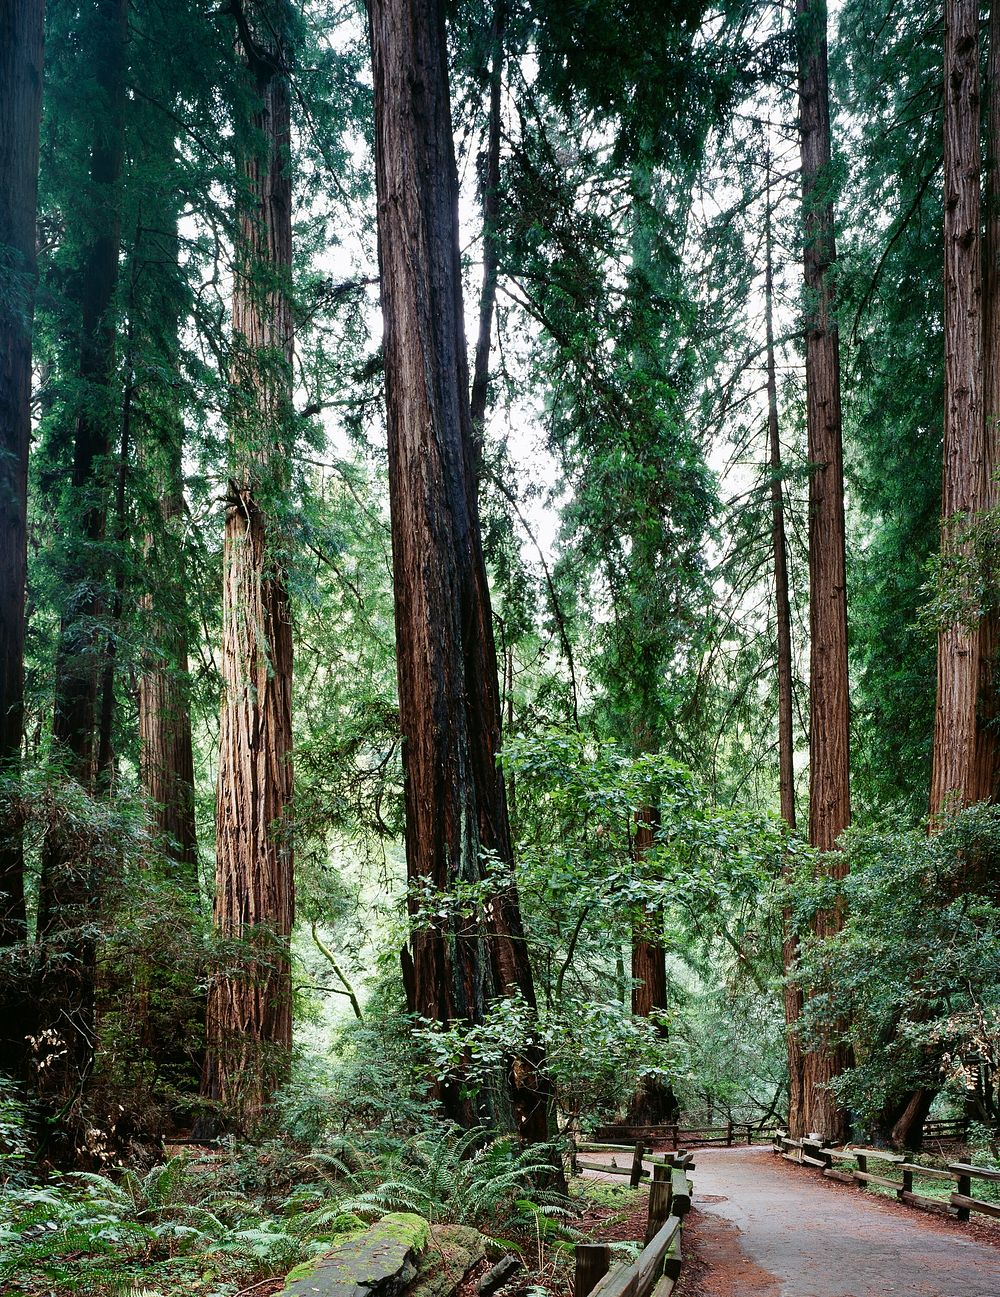 Muir Woods. Original image from Carol M. Highsmith&rsquo;s America, Library of Congress collection. Digitally enhanced by…